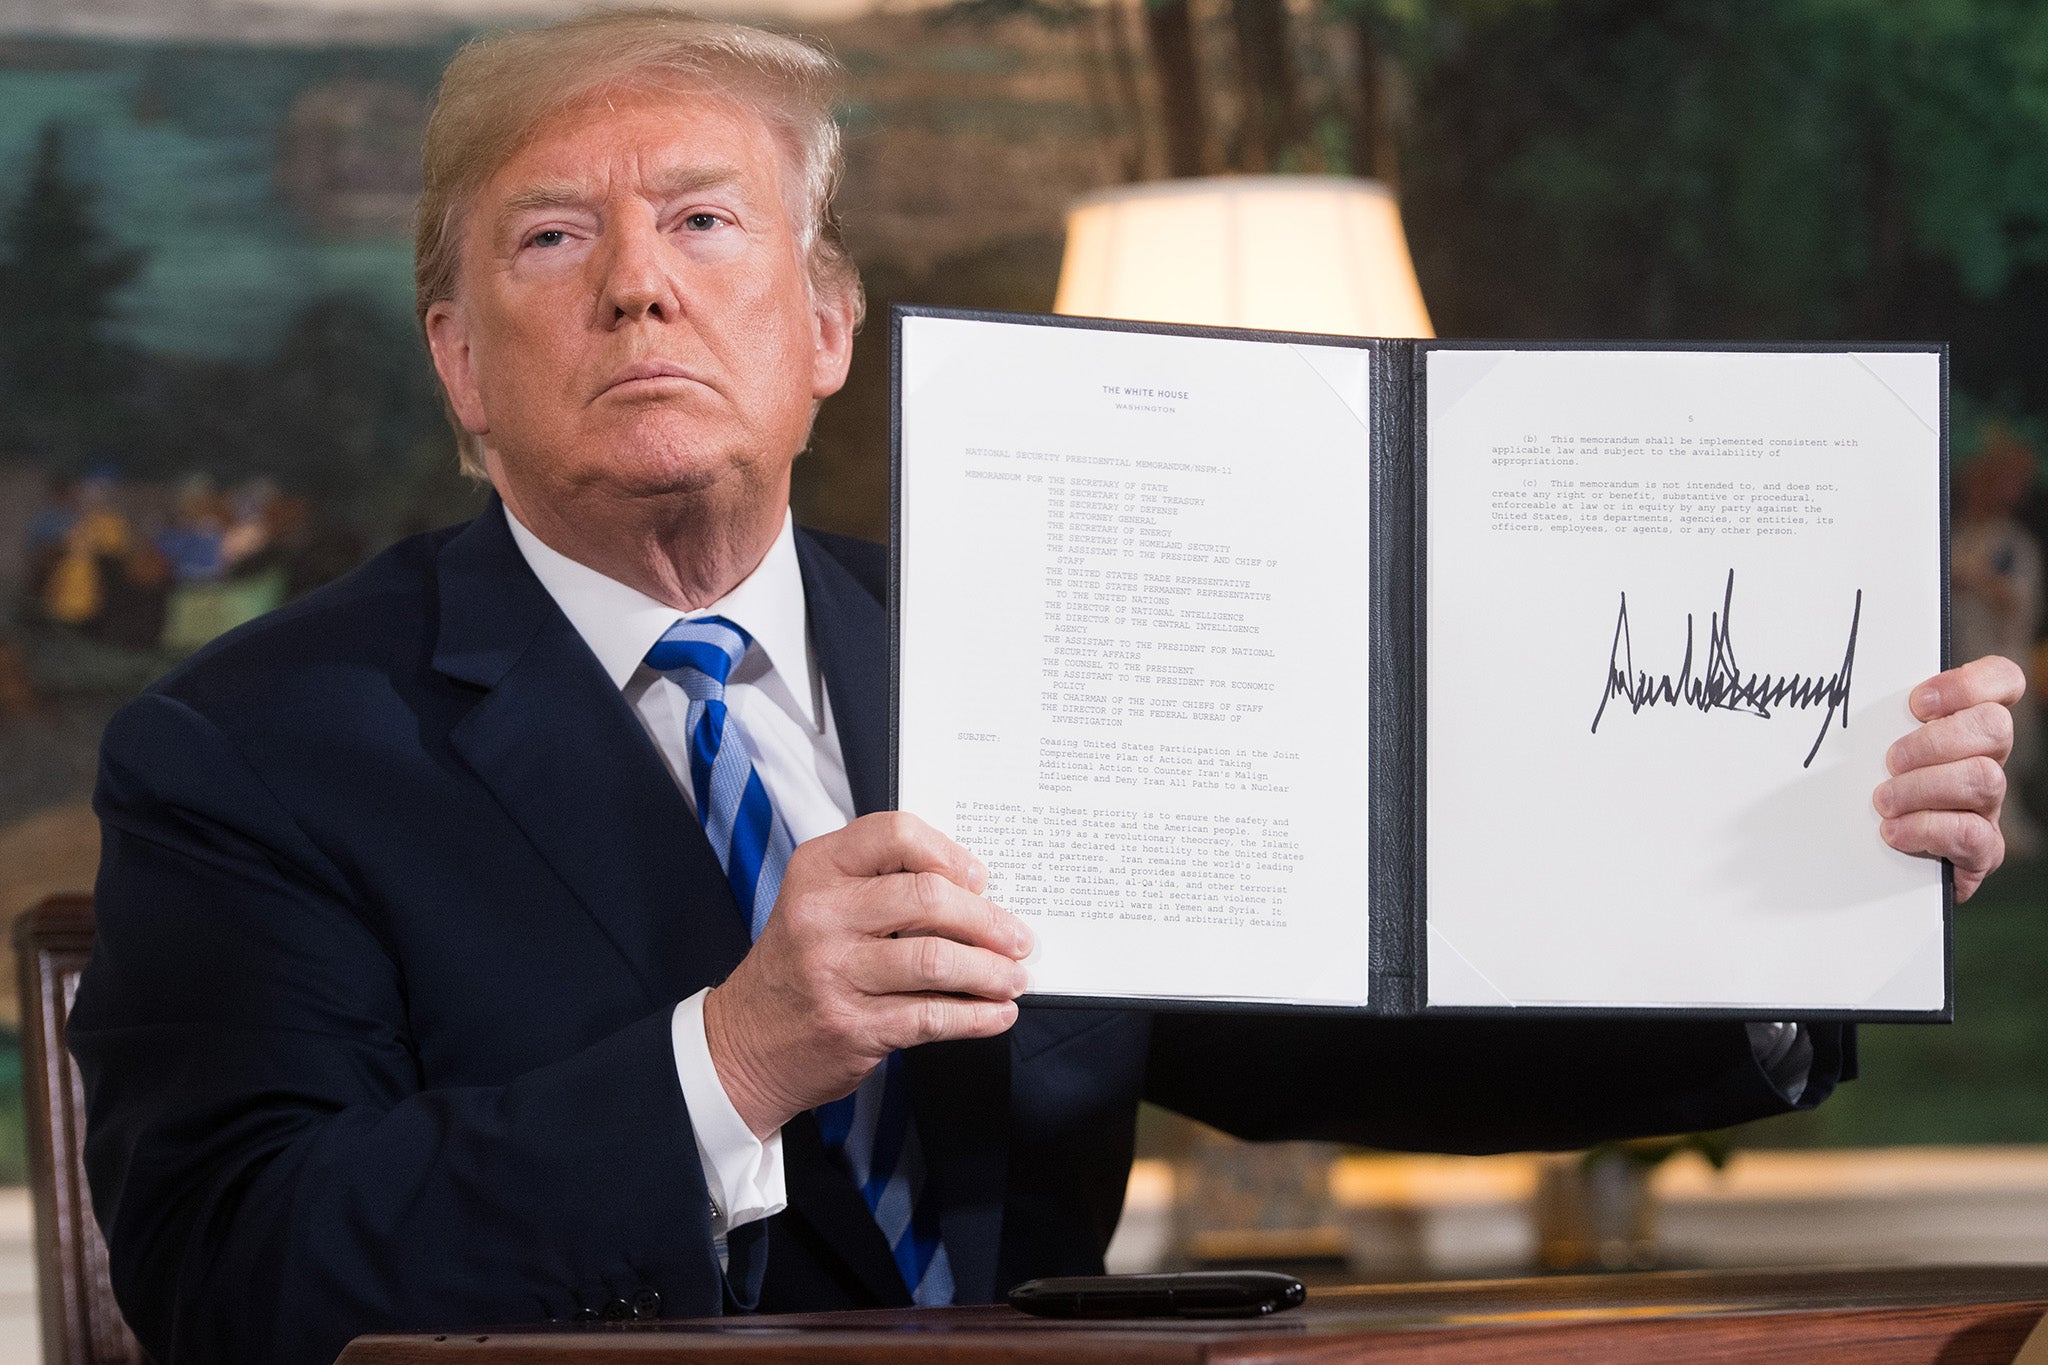 Trump wields his power with sanctions rather than airstrikes. Here he reinstates sanctions against Iran after announcing the US withdrawal from the Iran nuclear deal in May, 2018